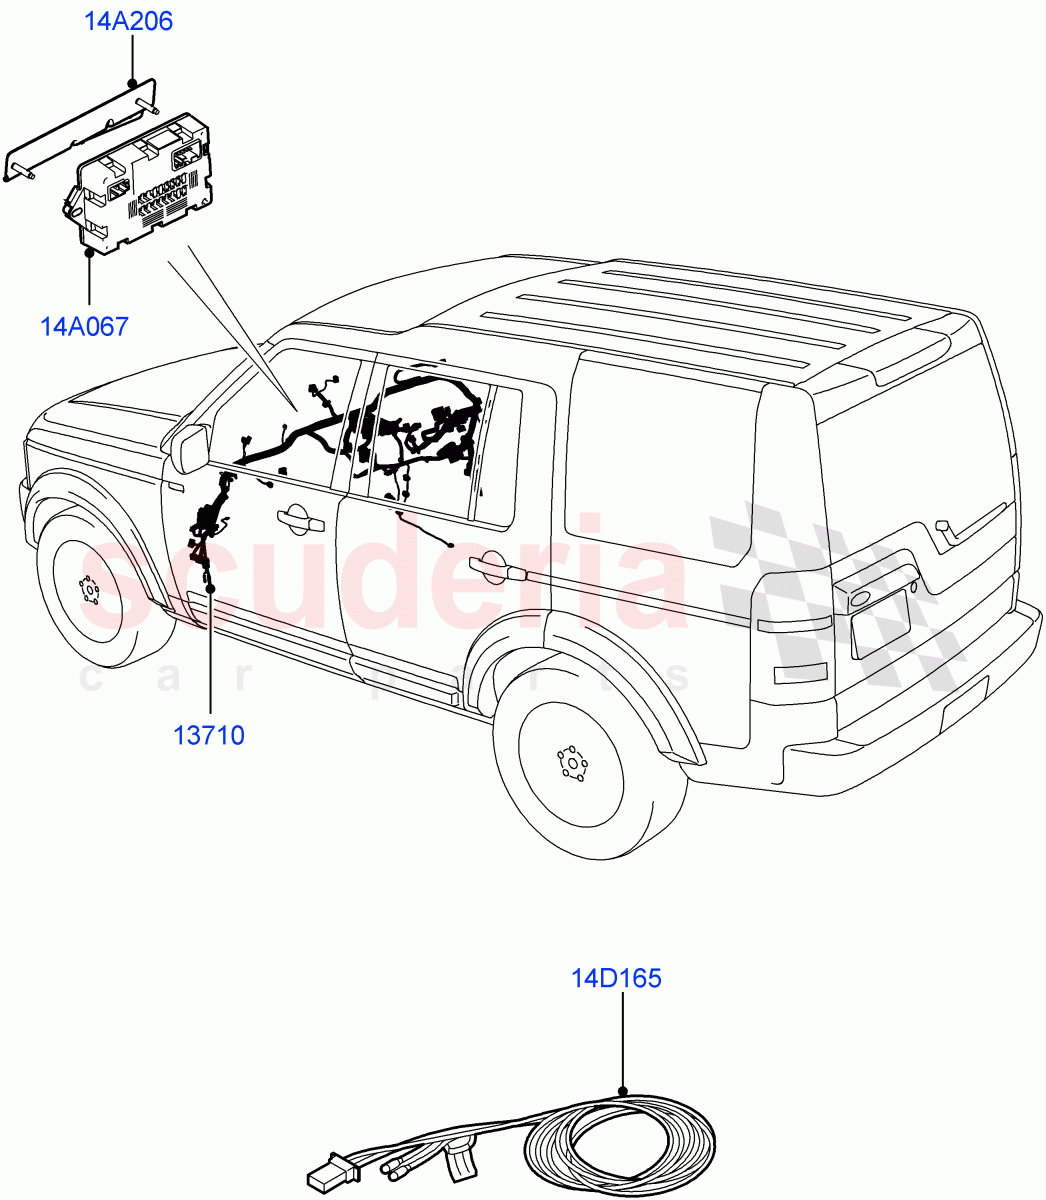 Electrical Wiring - Engine And Dash(Facia)((V)FROMAA000001) of Land Rover Land Rover Discovery 4 (2010-2016) [5.0 OHC SGDI NA V8 Petrol]